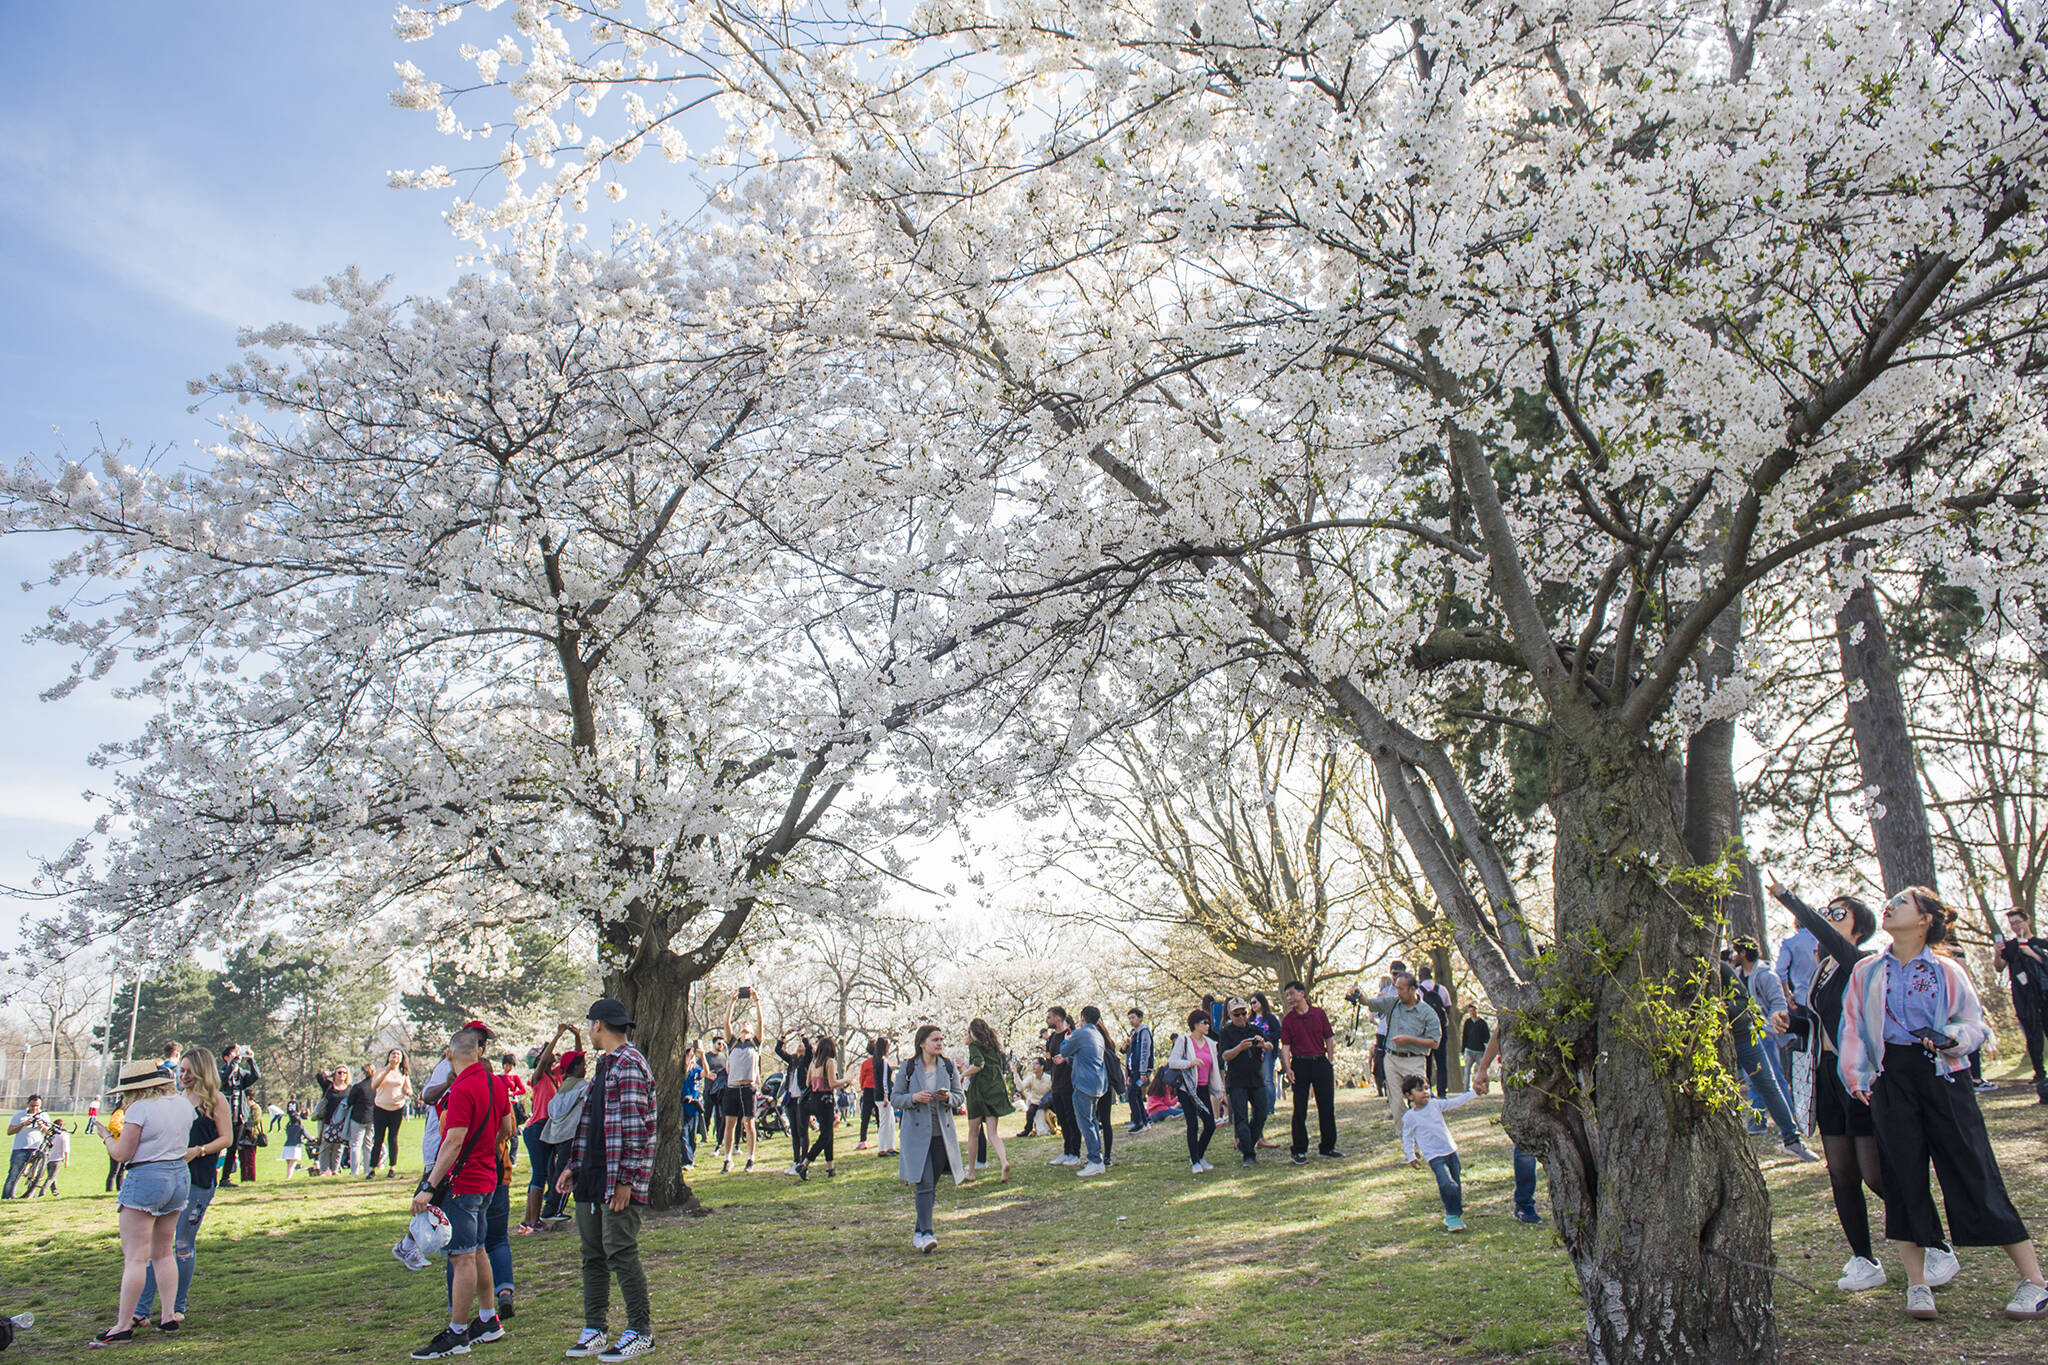 This is the 60th year cherry blossoms will be blooming in High Park